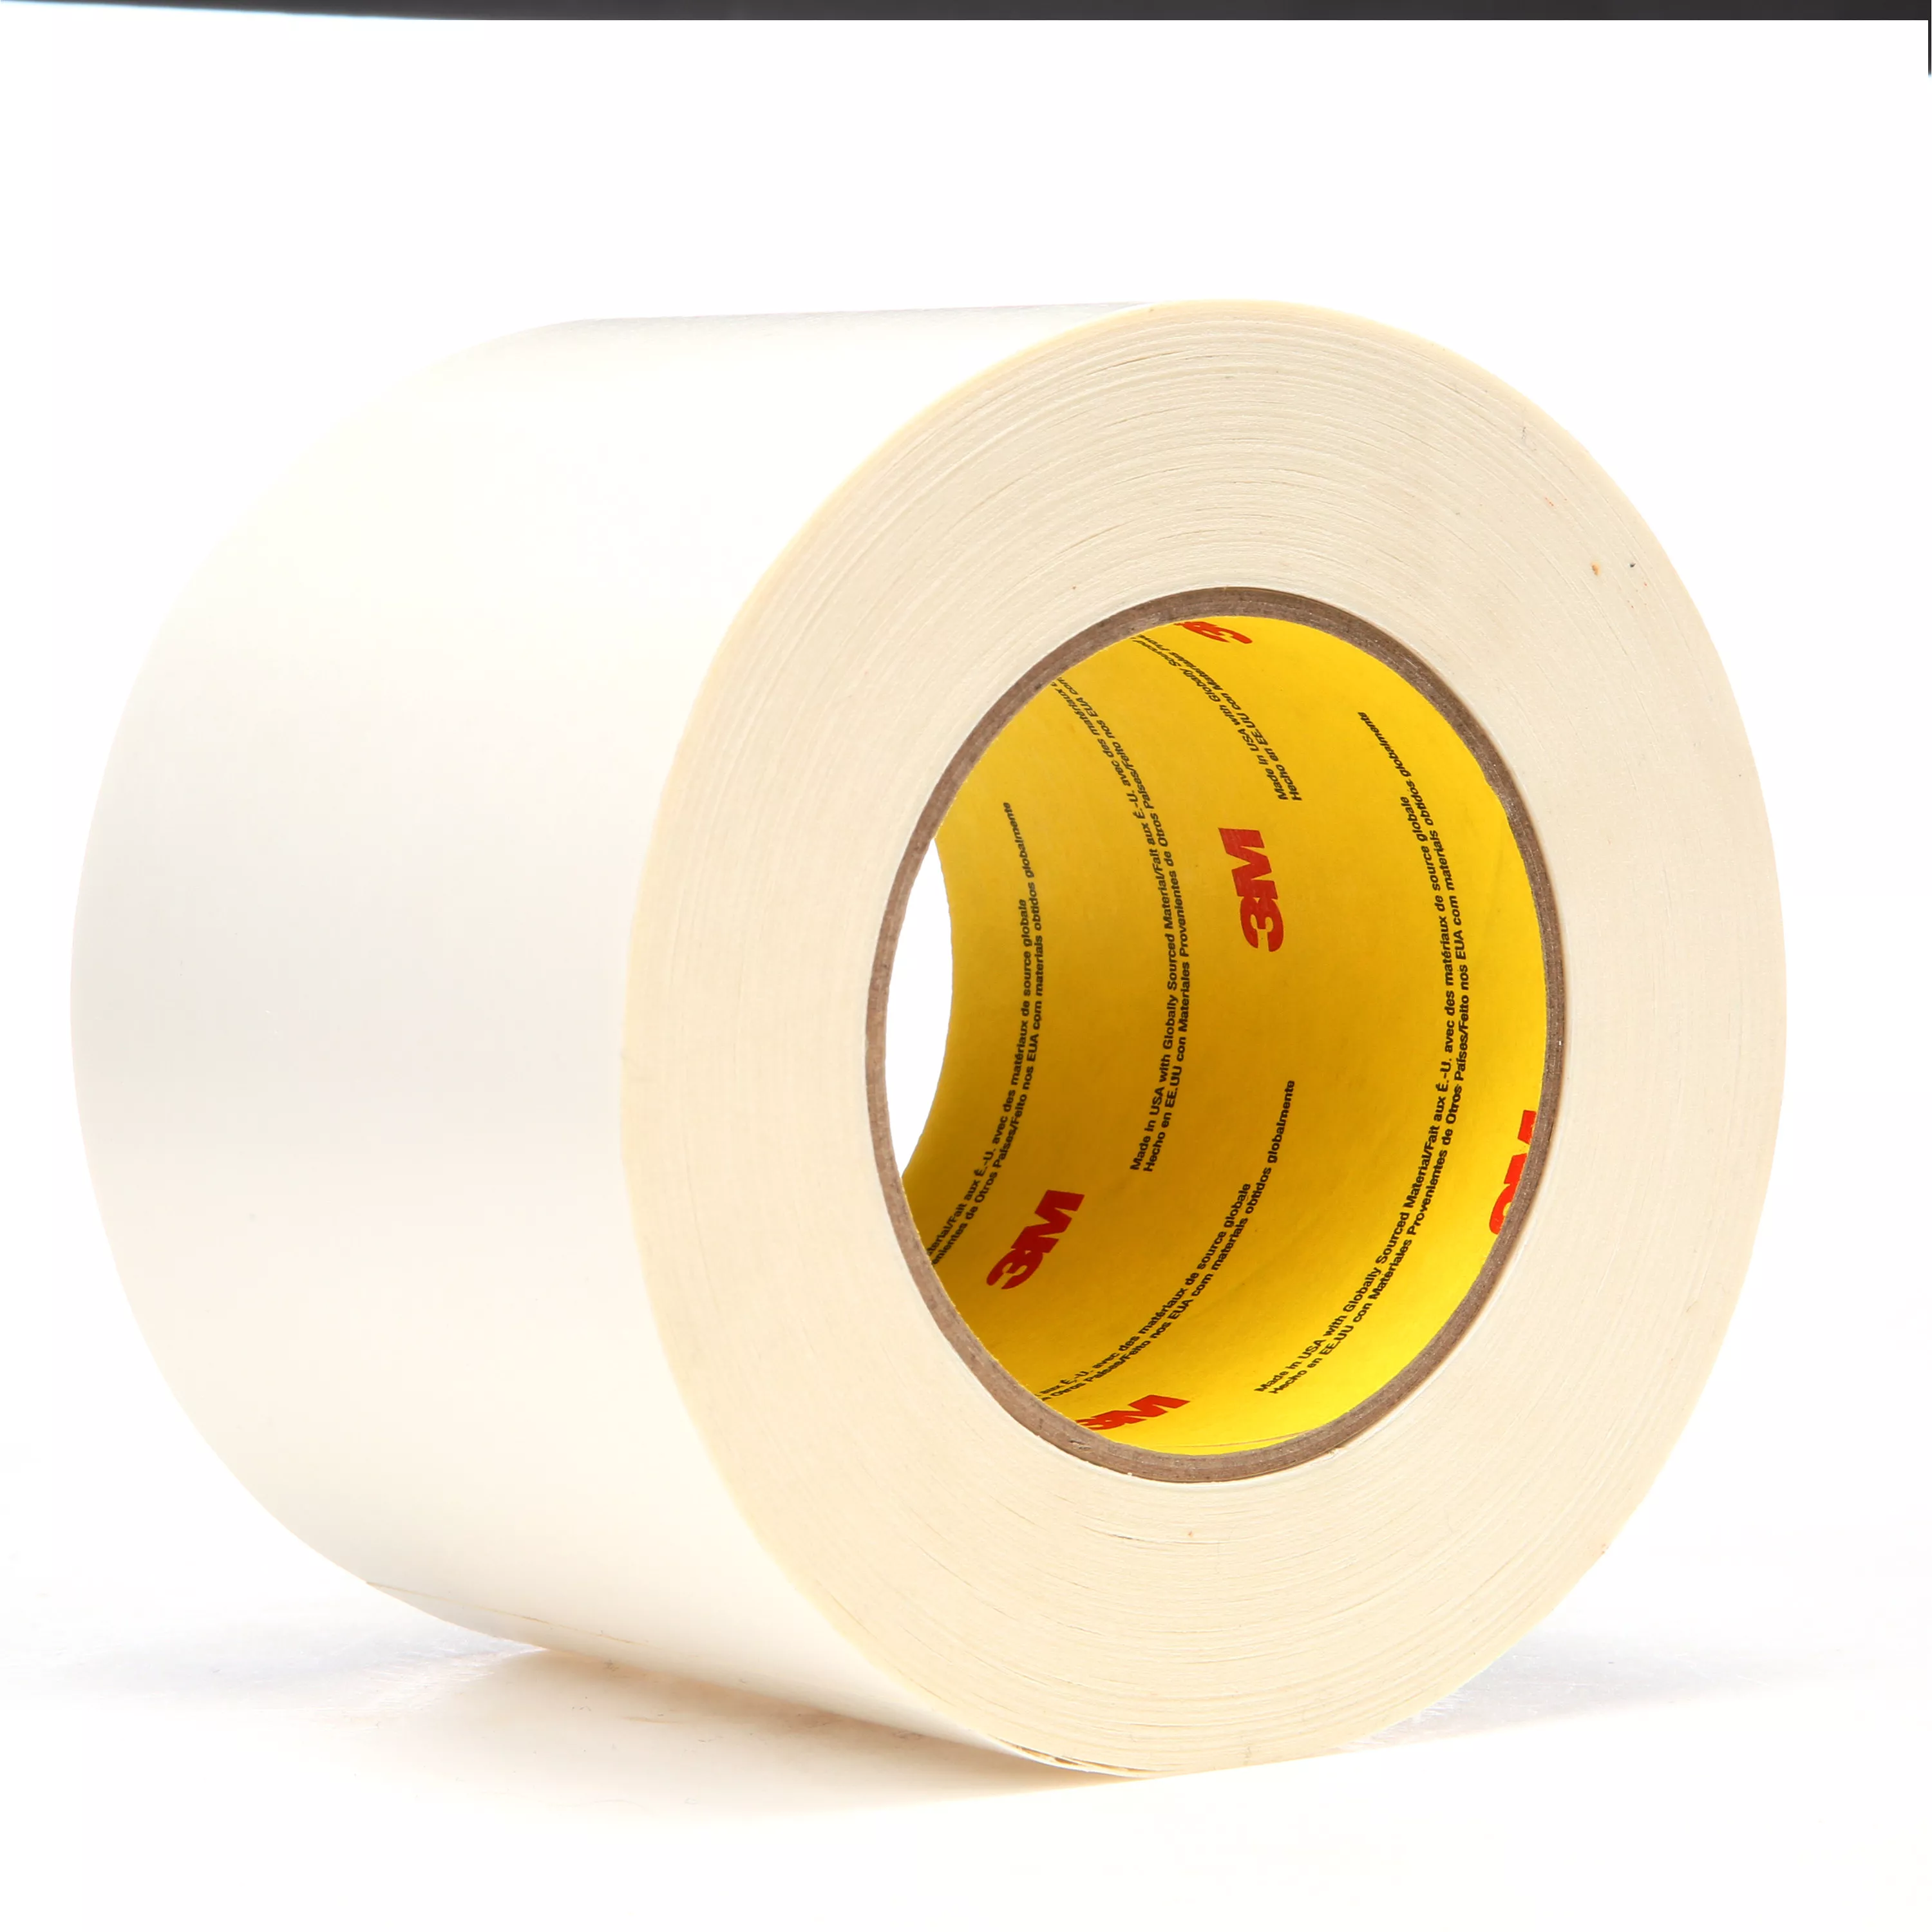 3M™ Repulpable Double Coated Splicing Tape 9038W, White, 72 mm x 33 m,
3
mil, 12 Roll/Case